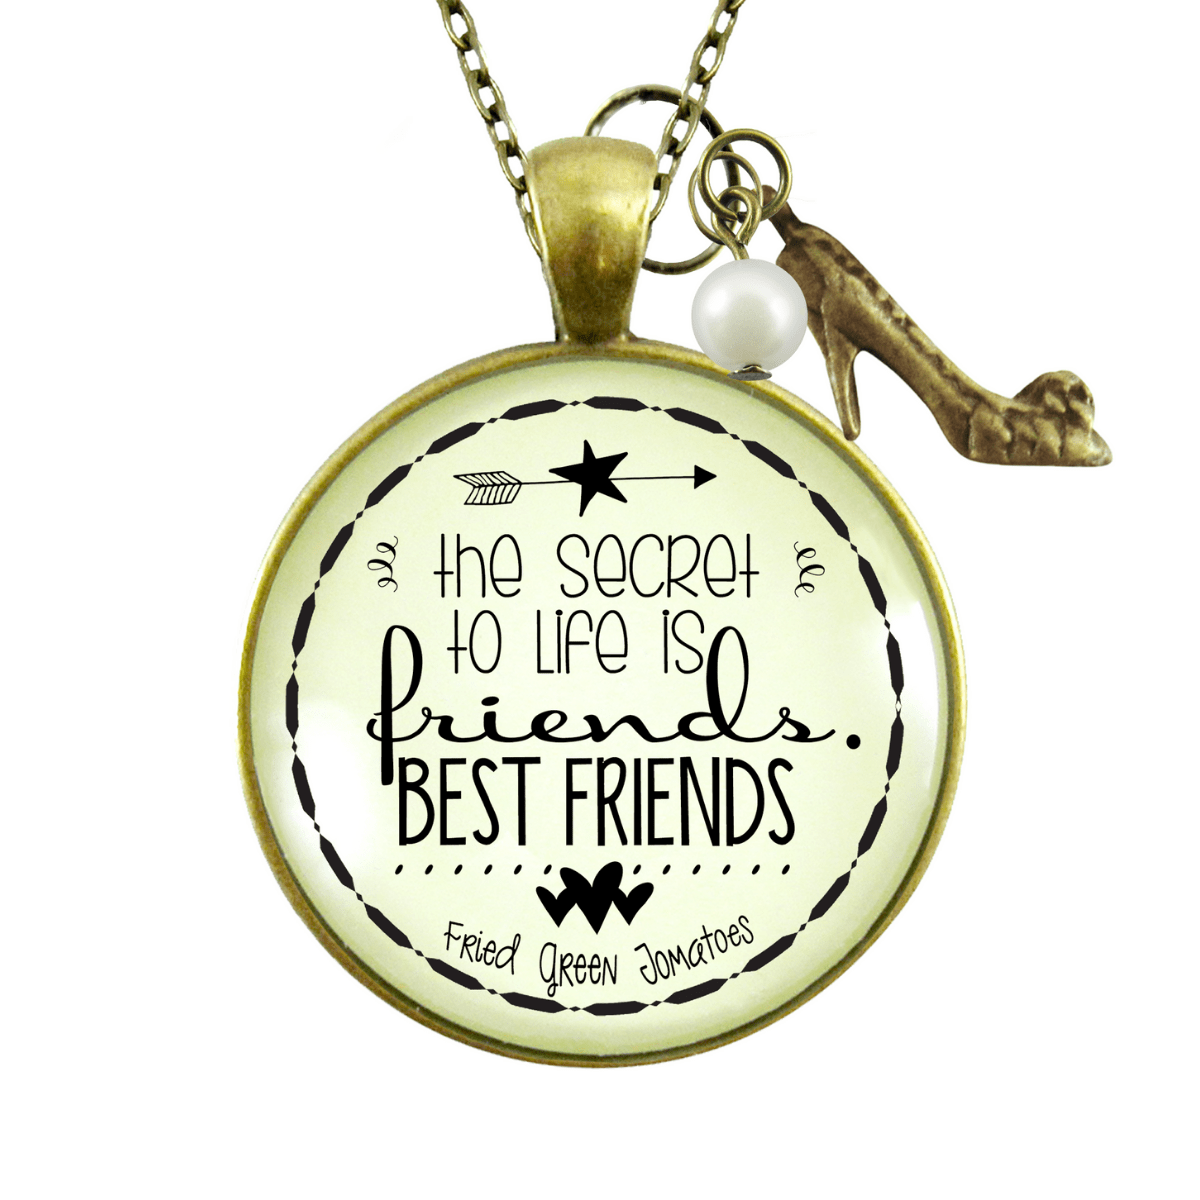 Gutsy Goodness The Secret to Life is Friends BFF Necklace Quote Boho Chic Jewelry - Gutsy Goodness;The Secret To Life Is Friends Best Friends - Heel - Gutsy Goodness Handmade Jewelry Gifts